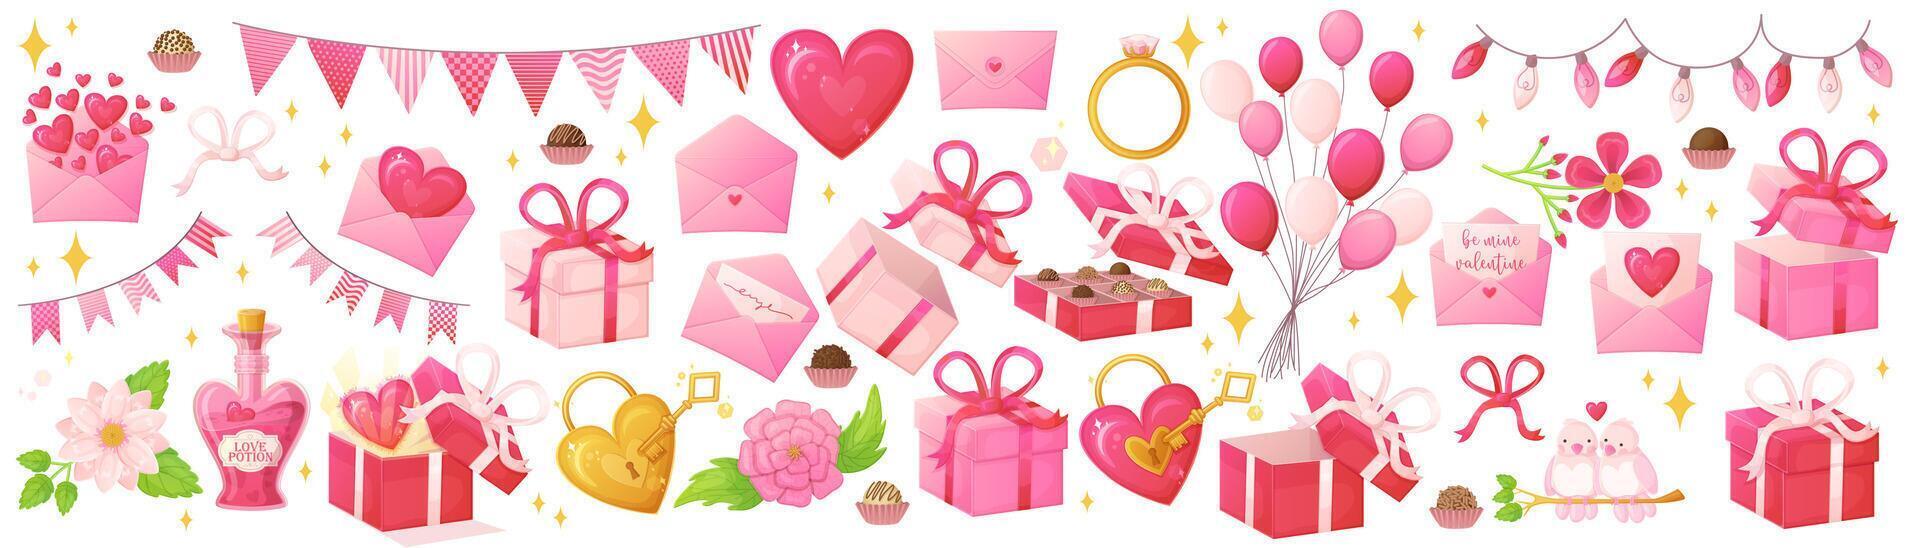 Pink Valentine day objects set. Romantic decoration symbols in realistic cartoon style. vector